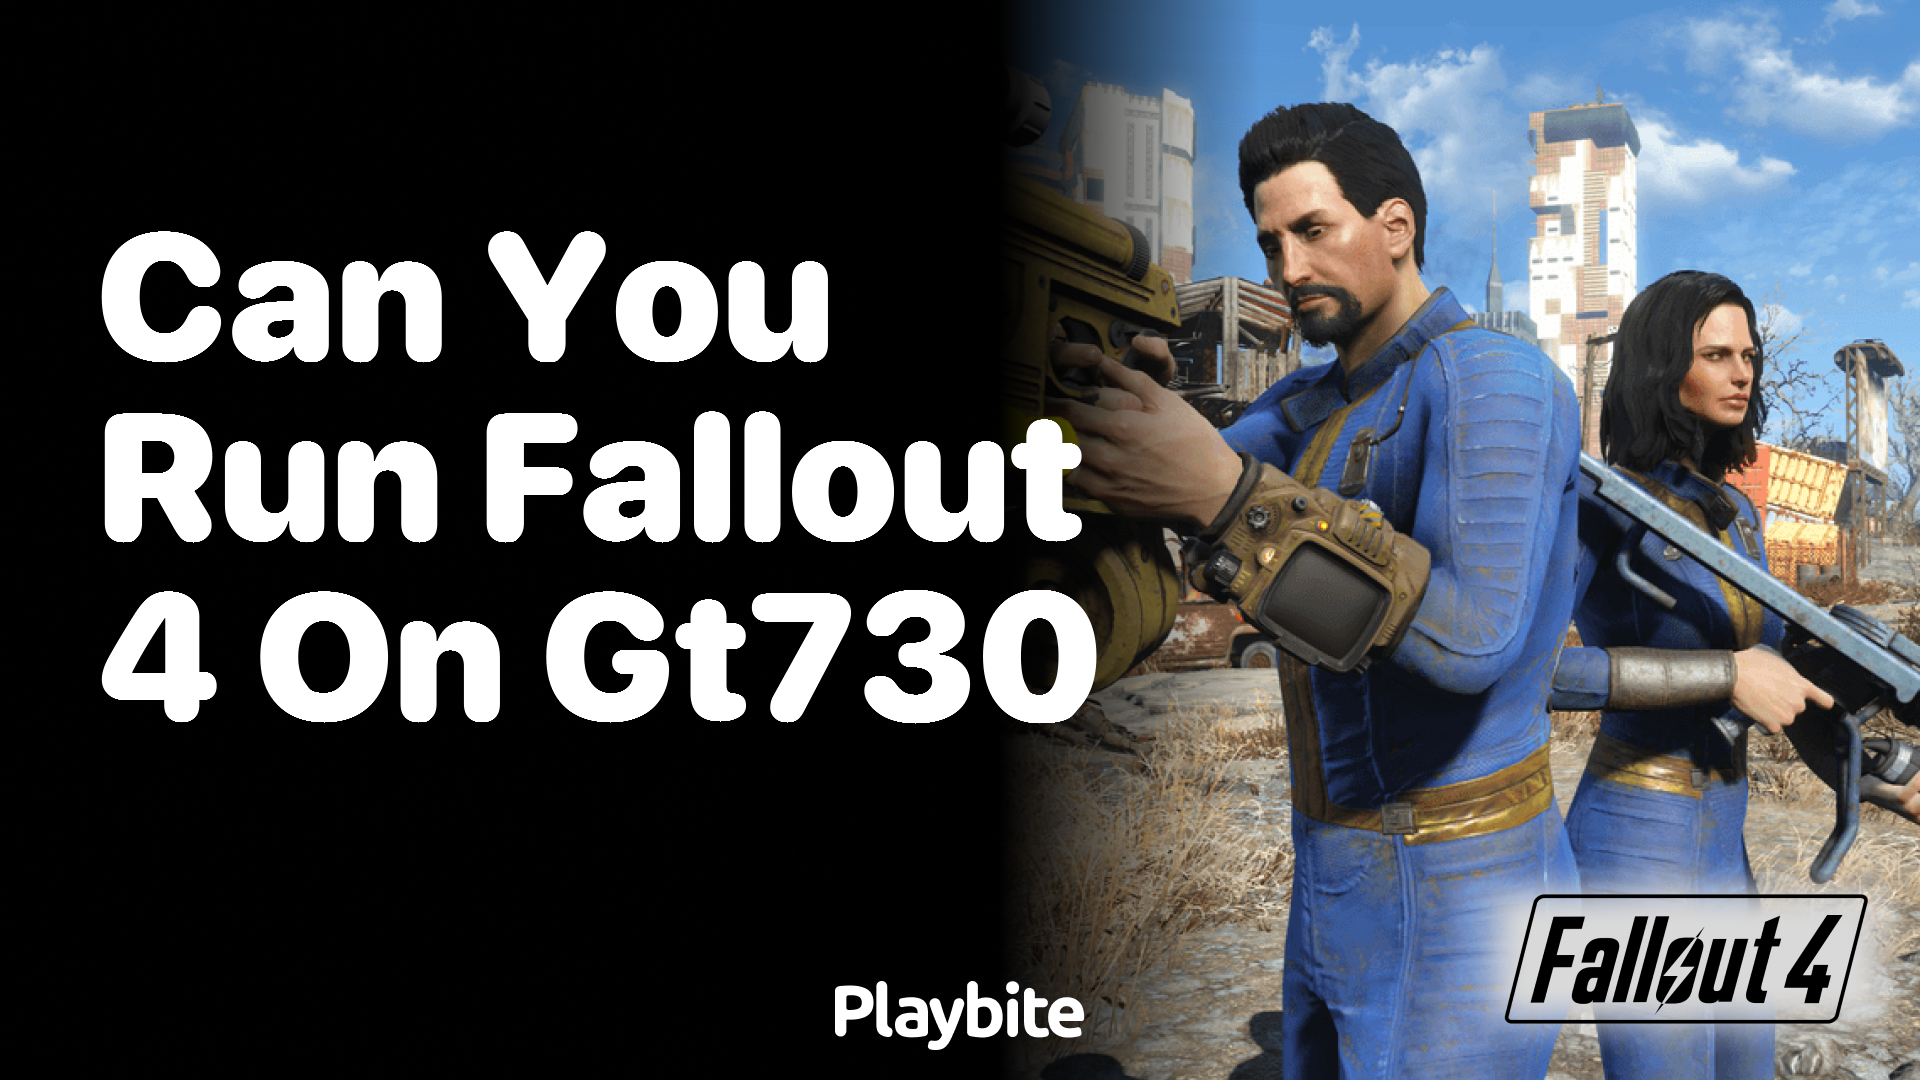 Can You Run Fallout 4 on a GT730?